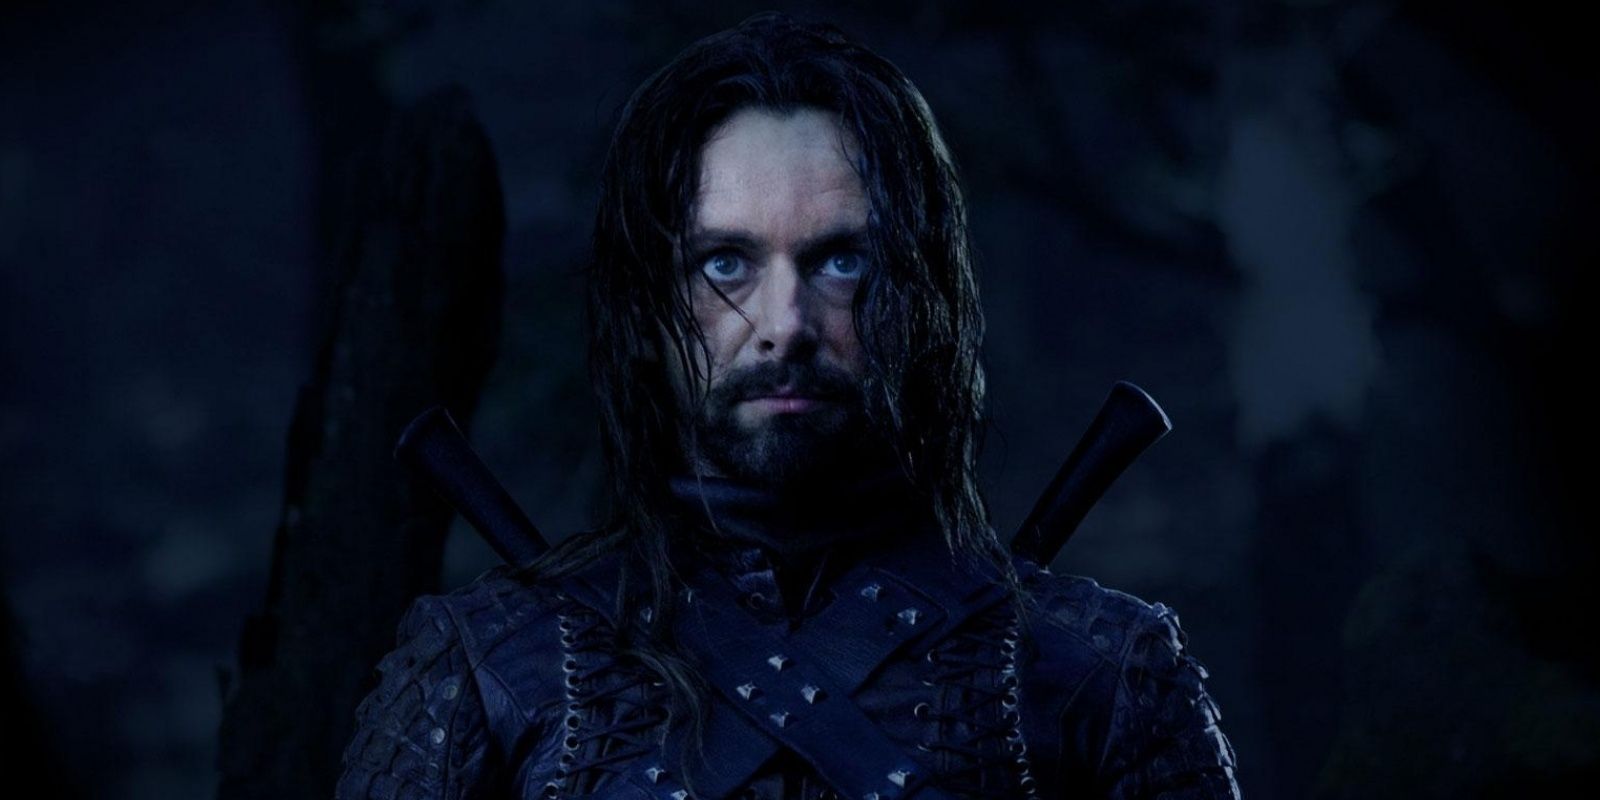 Michael Sheen in Rise of the Lycans